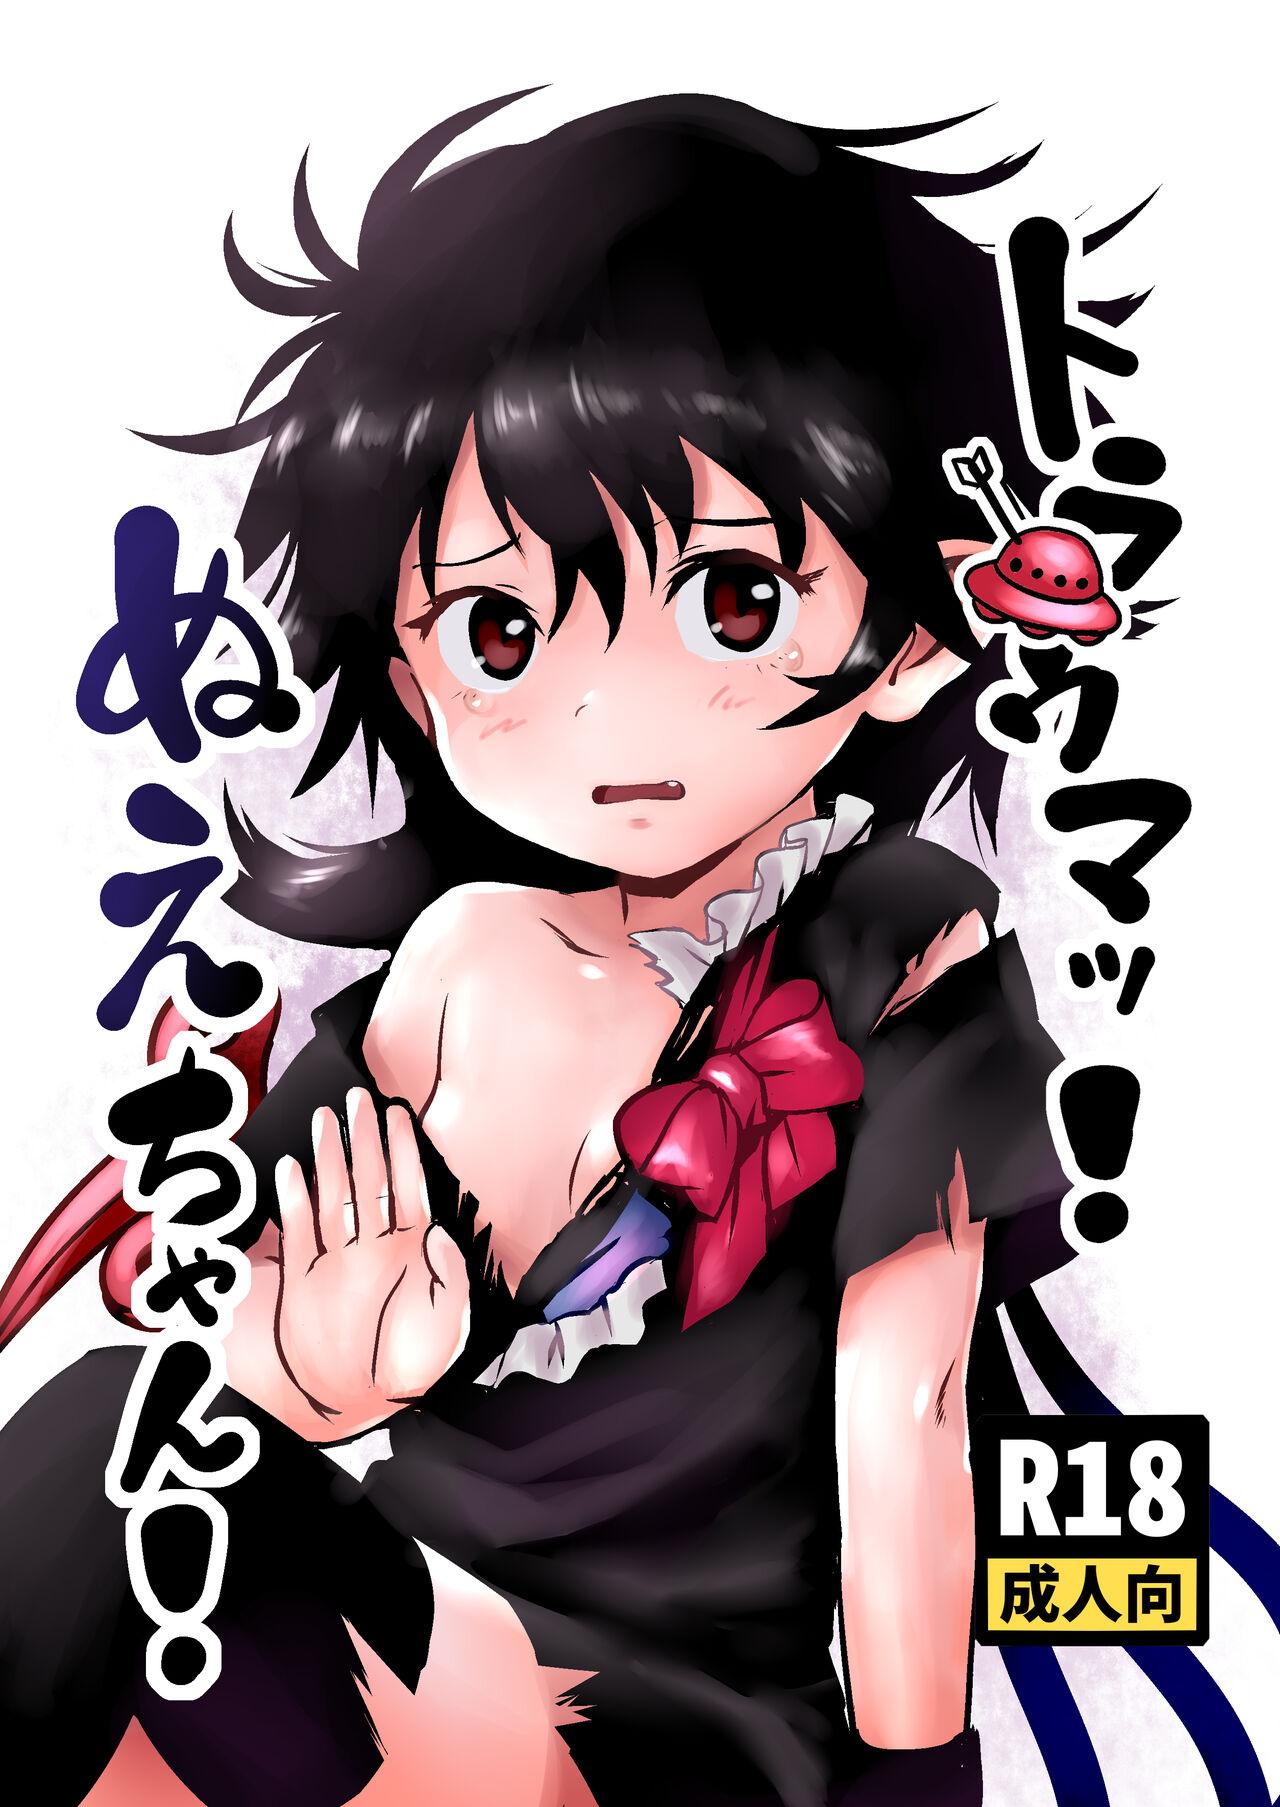 Passivo Trauma! Nue-chan! - Touhou project Show - Picture 1